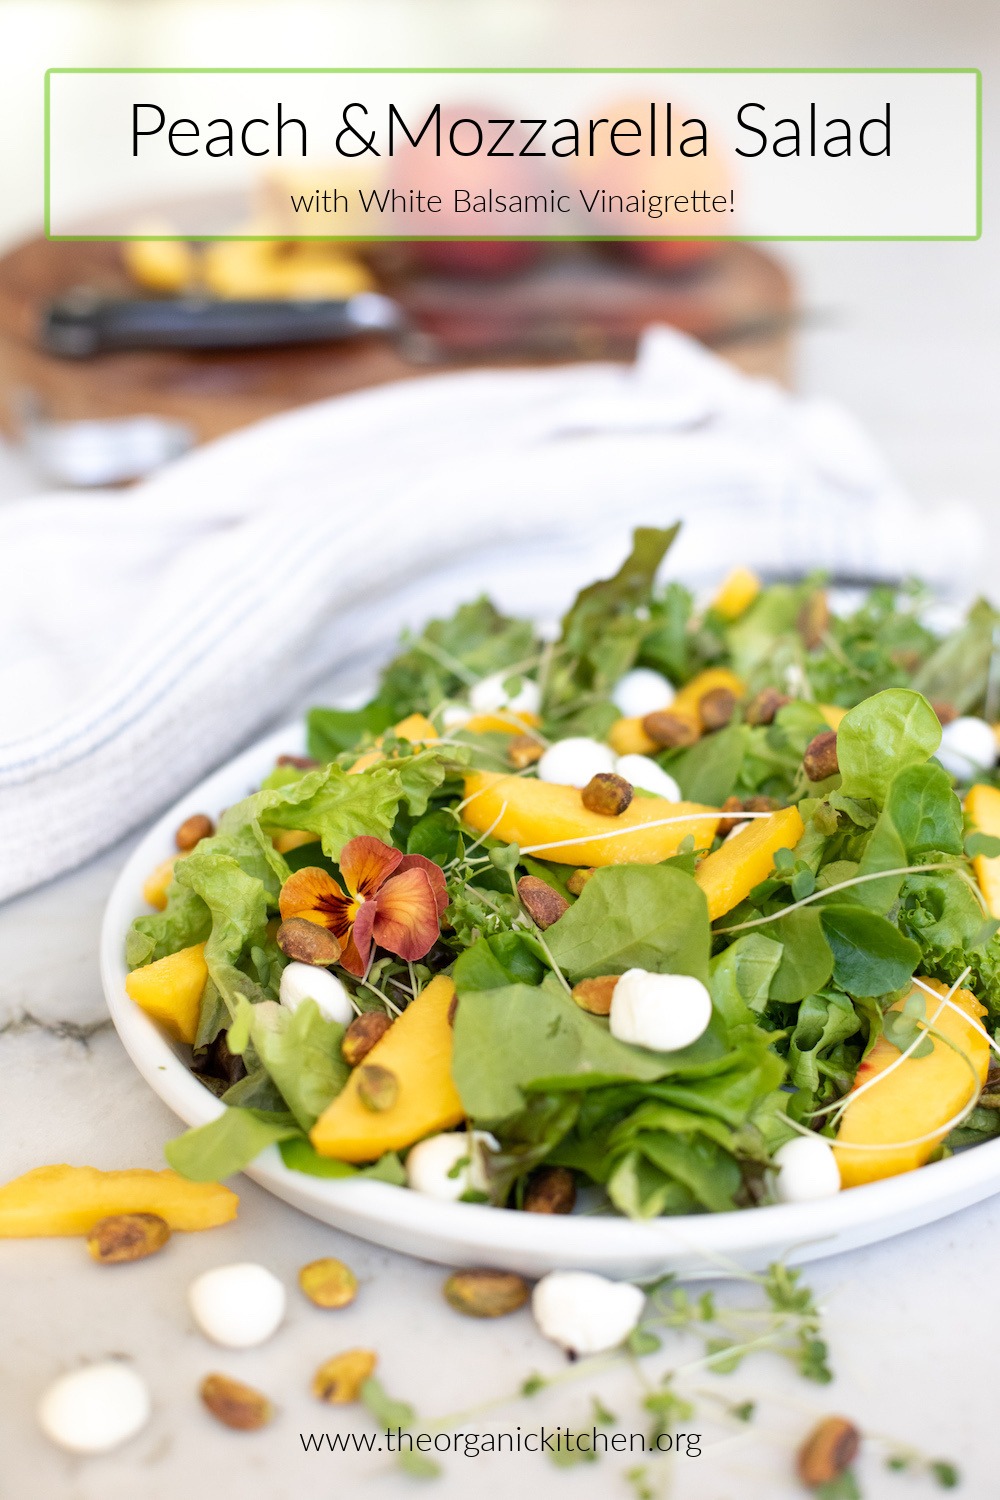 Easy Peach and Mozzarella Salad on white plate with dish towel and cutting board in background